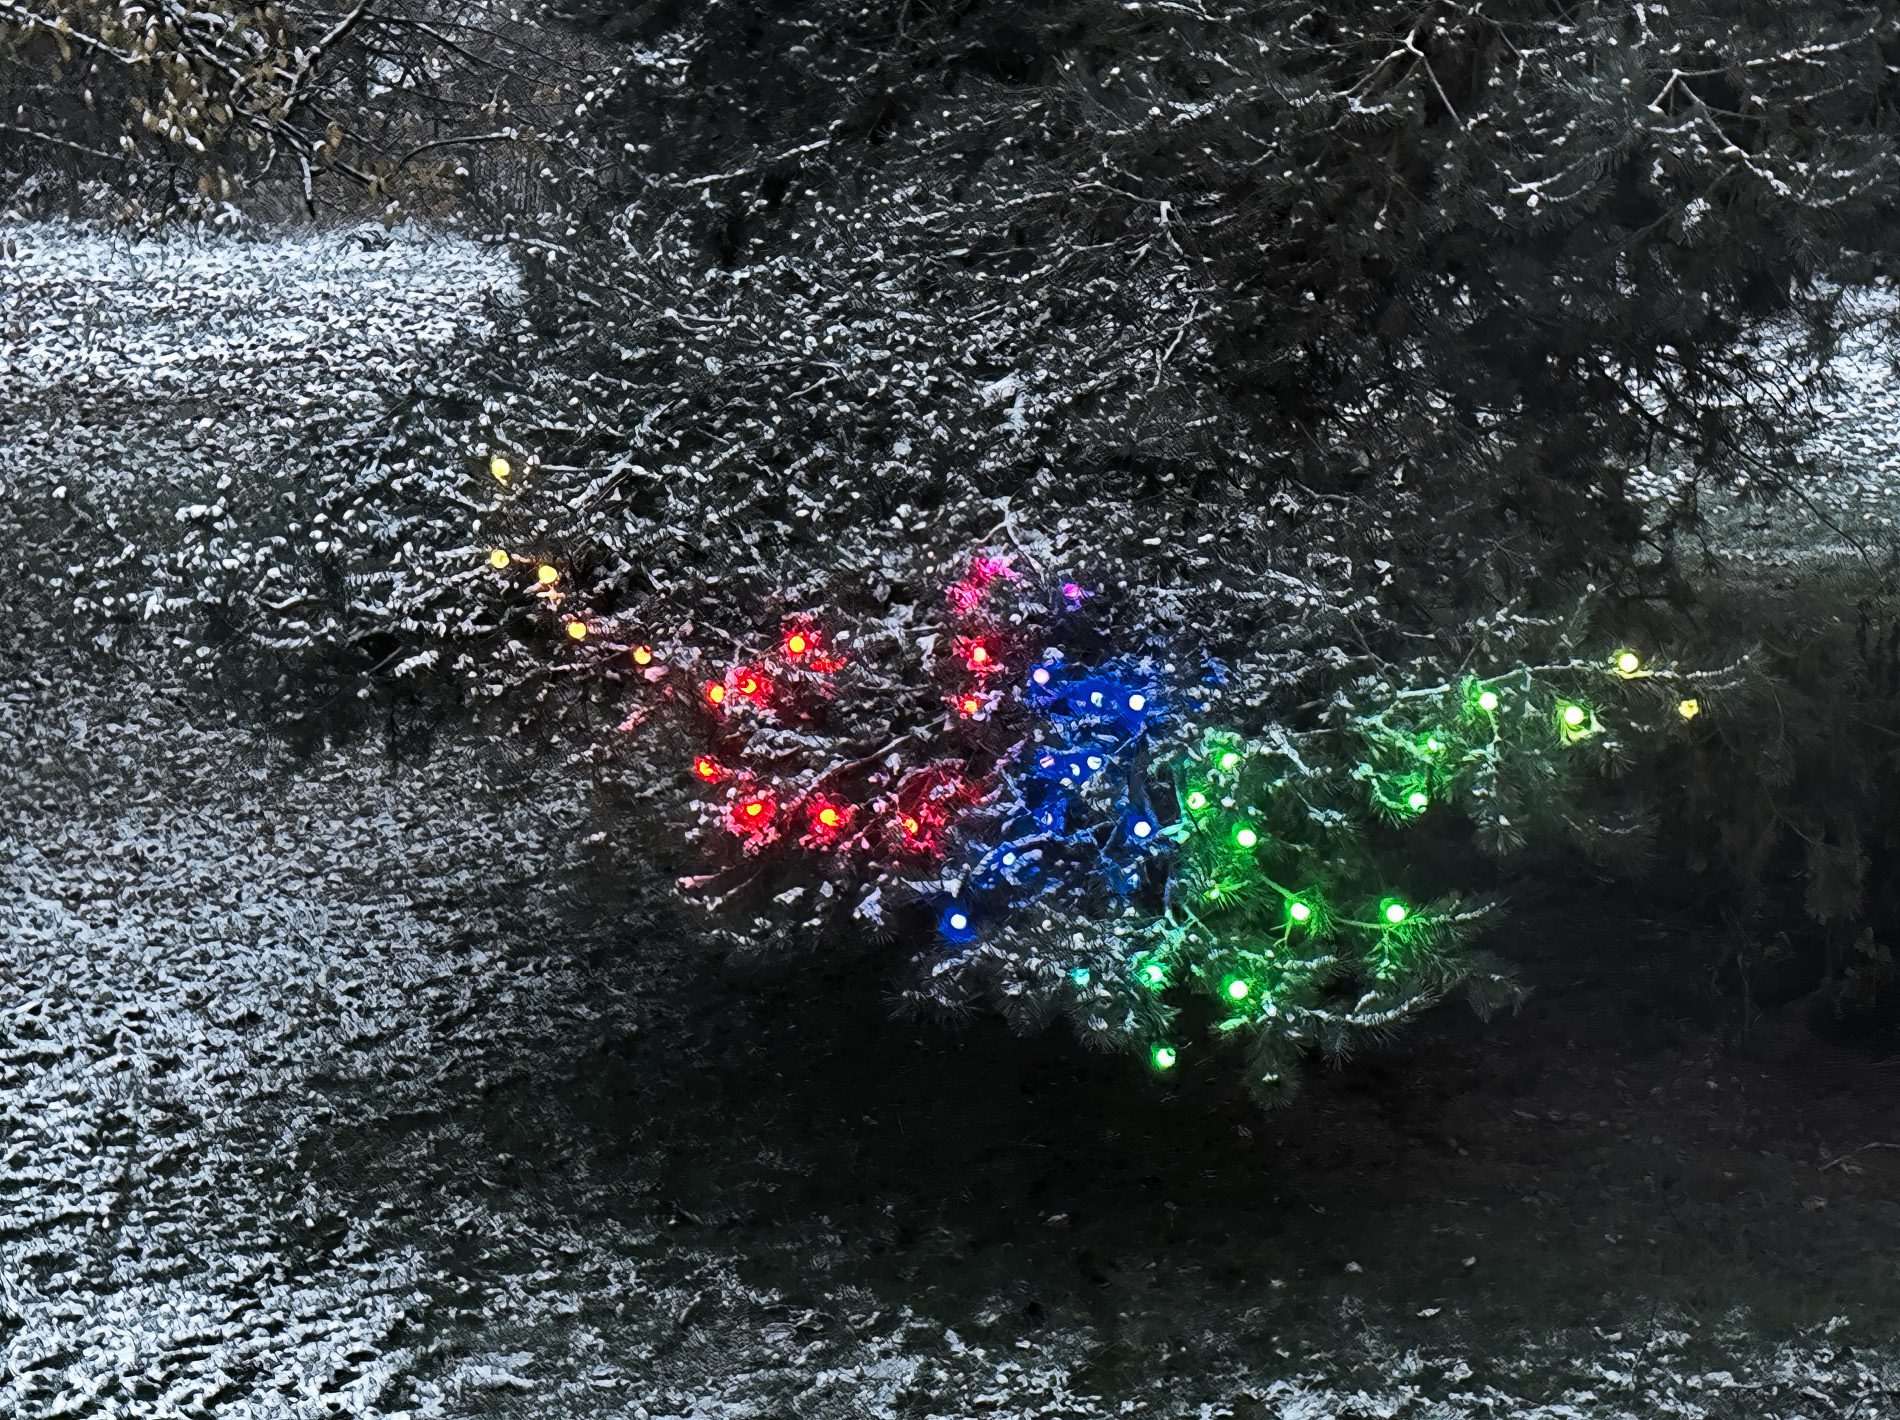 You can also make your tree colorful with the LED light chain, but I'm more of a friend of subtle colors - not included in the photo.